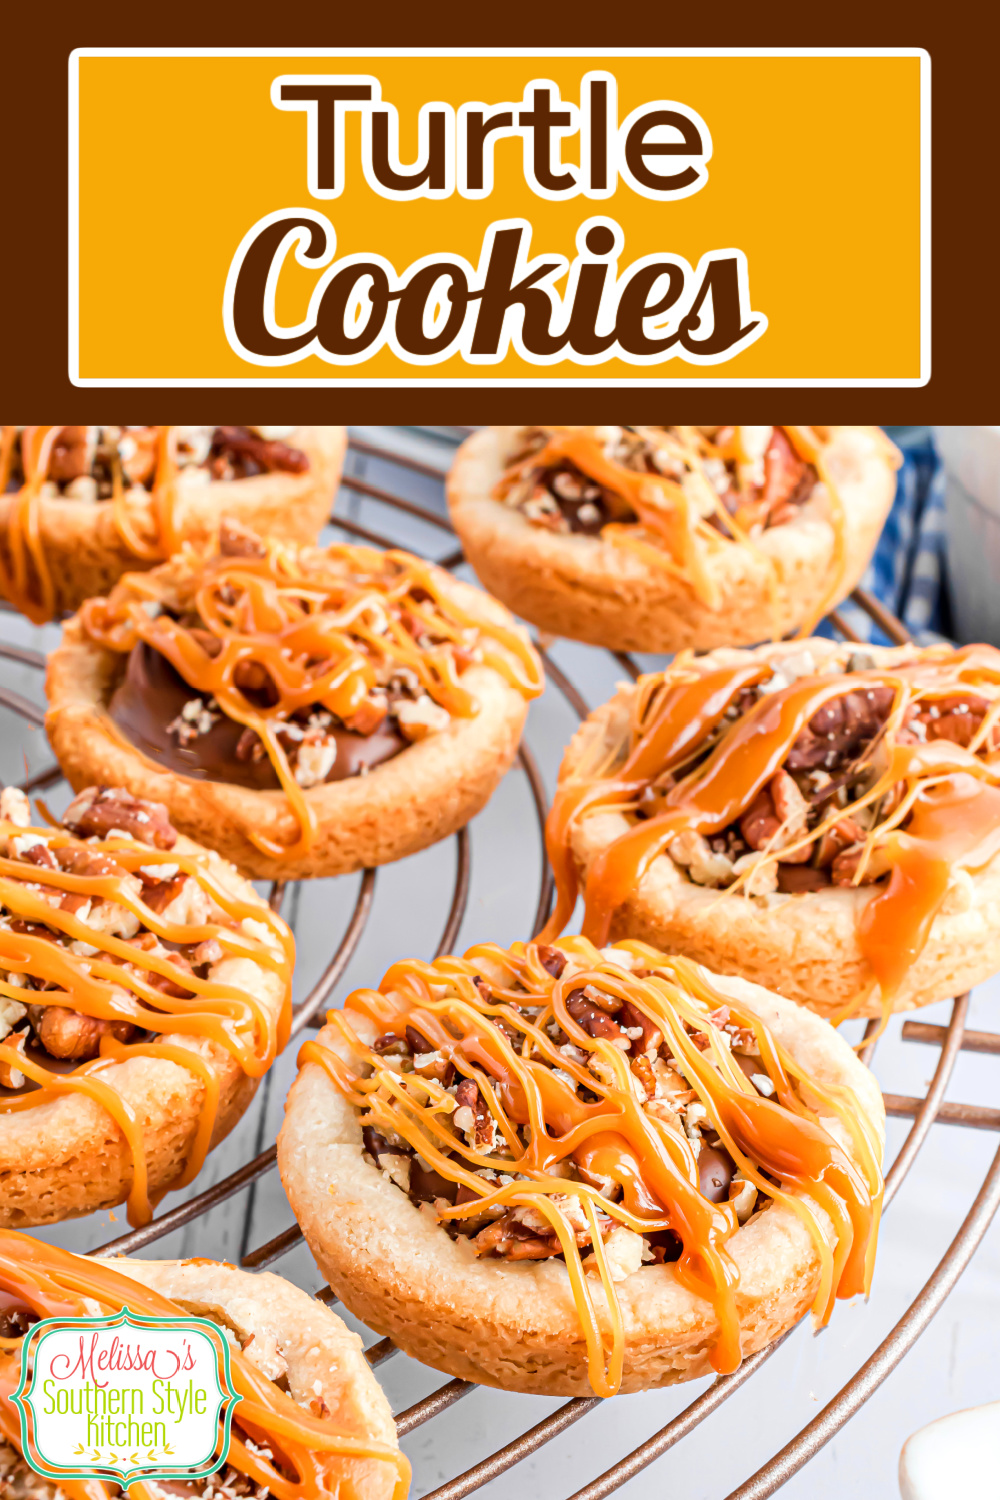 These scratch made Turtle Cookies are baked in a muffin pan to form a delicious cookie bowl to hold the ooey gooey turtle toppings. #turtlecookies #turtlecookiecups #turtles #chocolate #caramelcookies #pecans #pecancookies #cookiebowls via @melissasssk